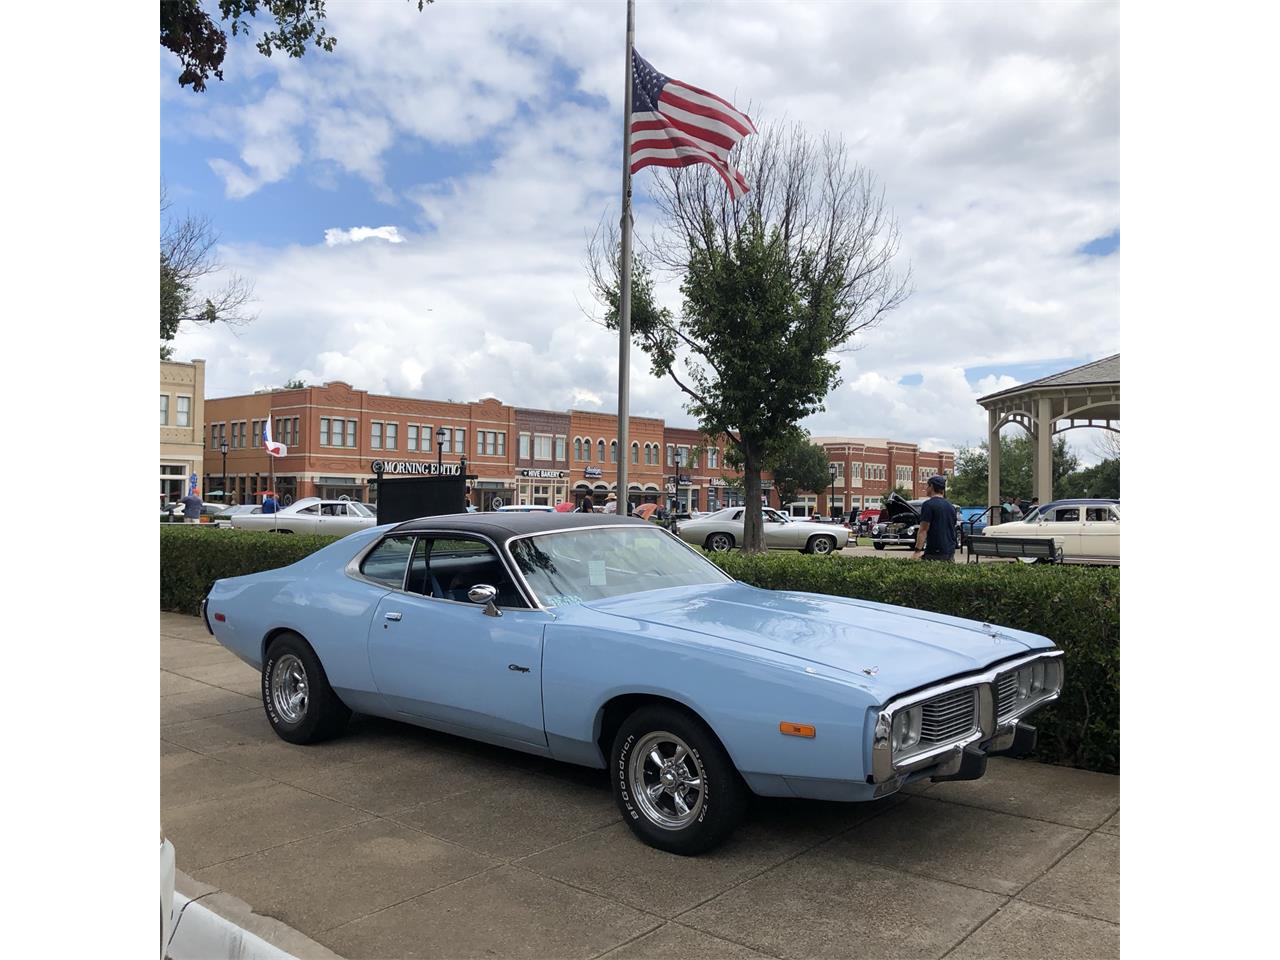 For Sale: 1973 Dodge Charger in Carrollton, Texas for sale in Carrollton, TX